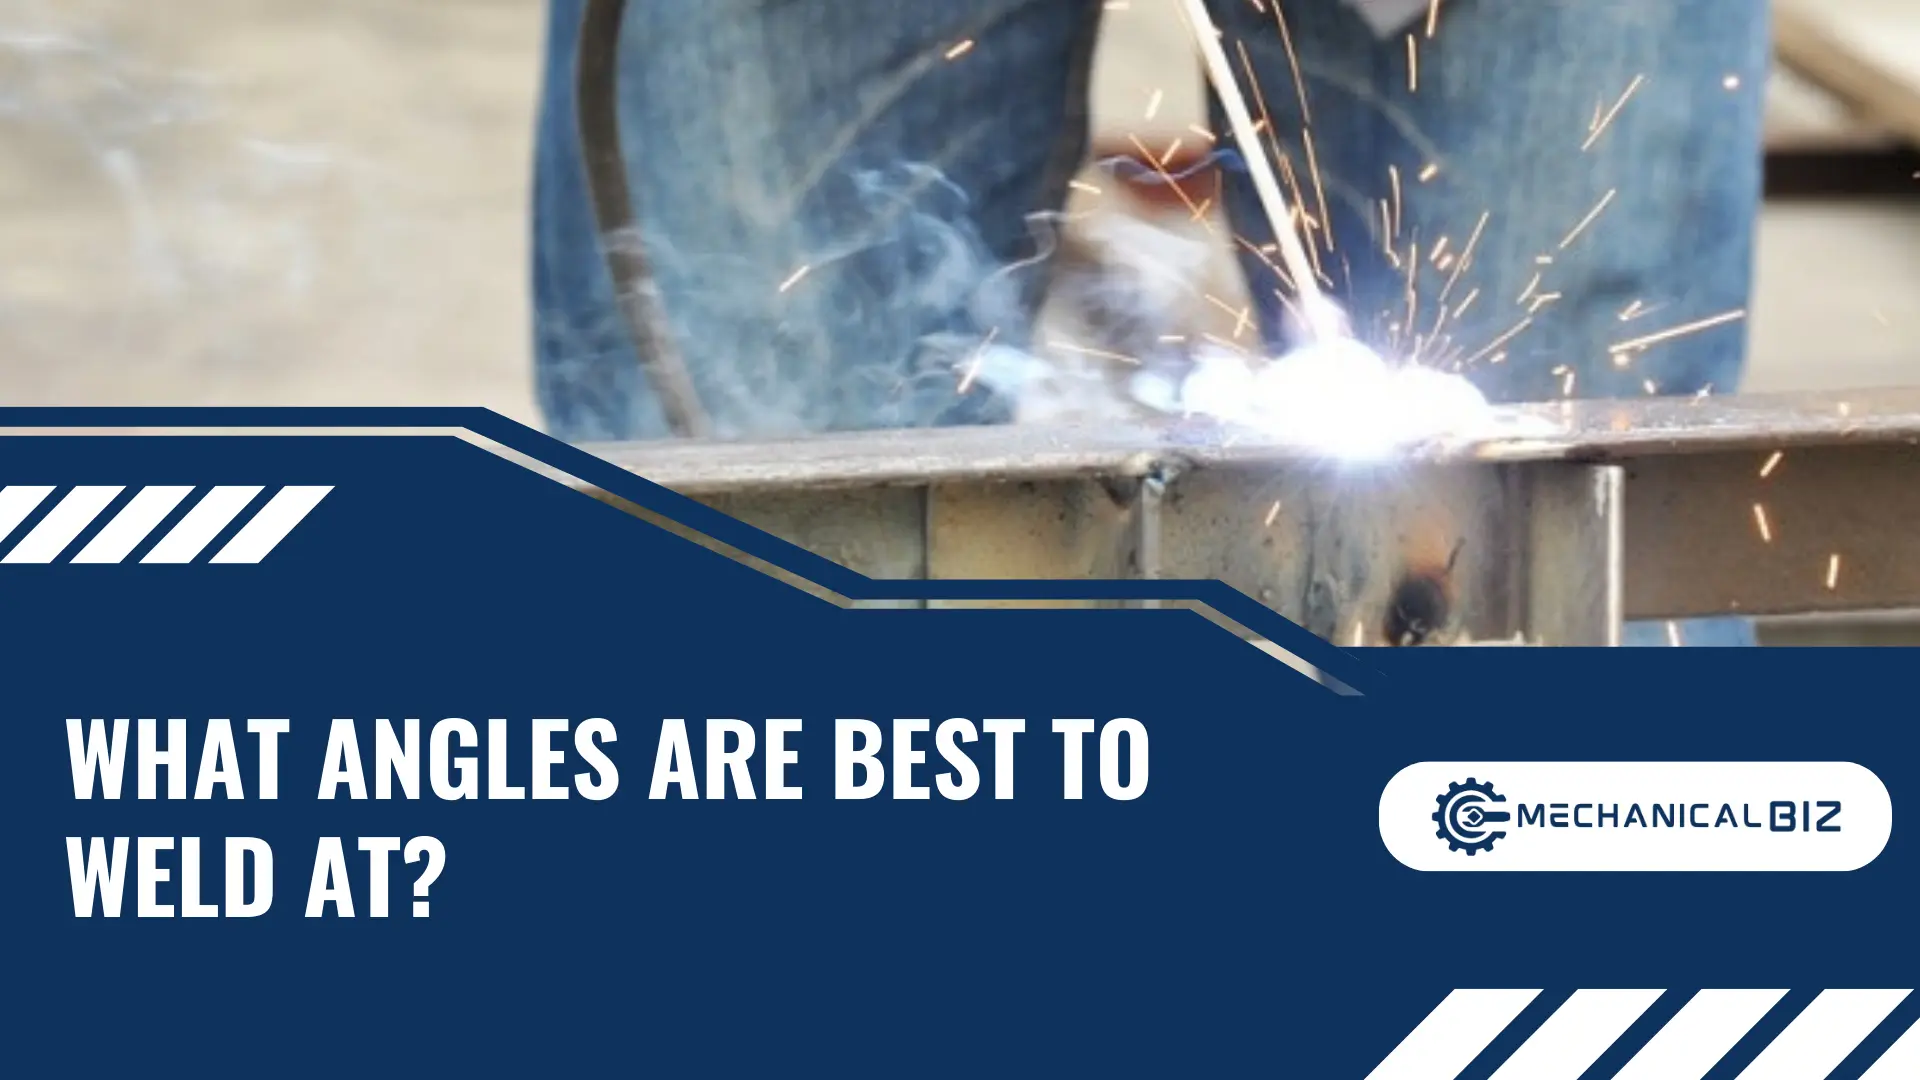 What Angles are Best to Weld At